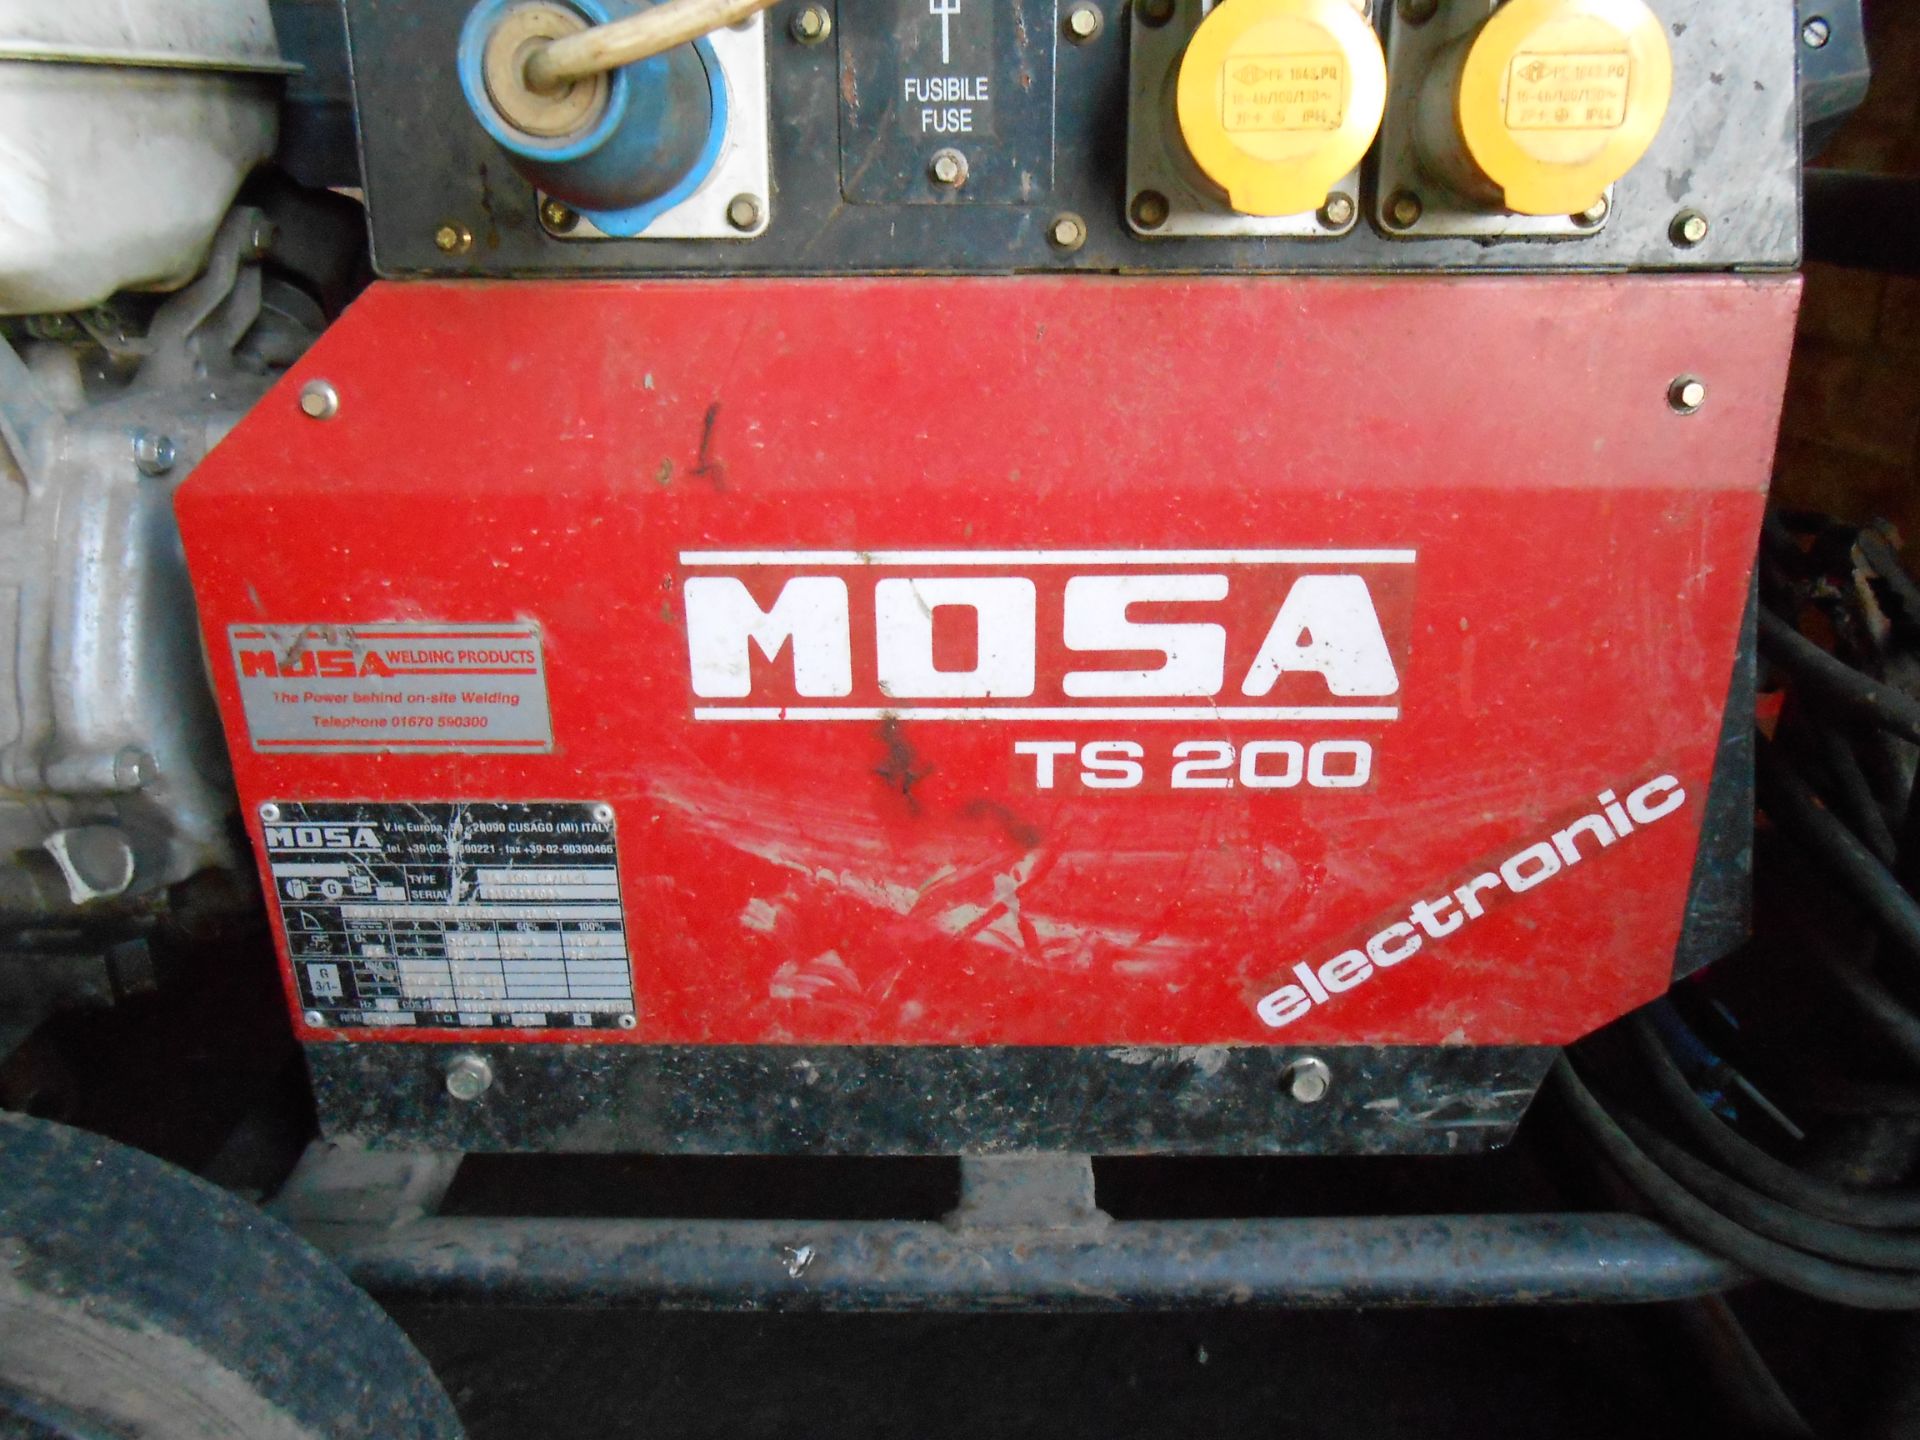 Mosa TS200 electric welder - Image 2 of 4